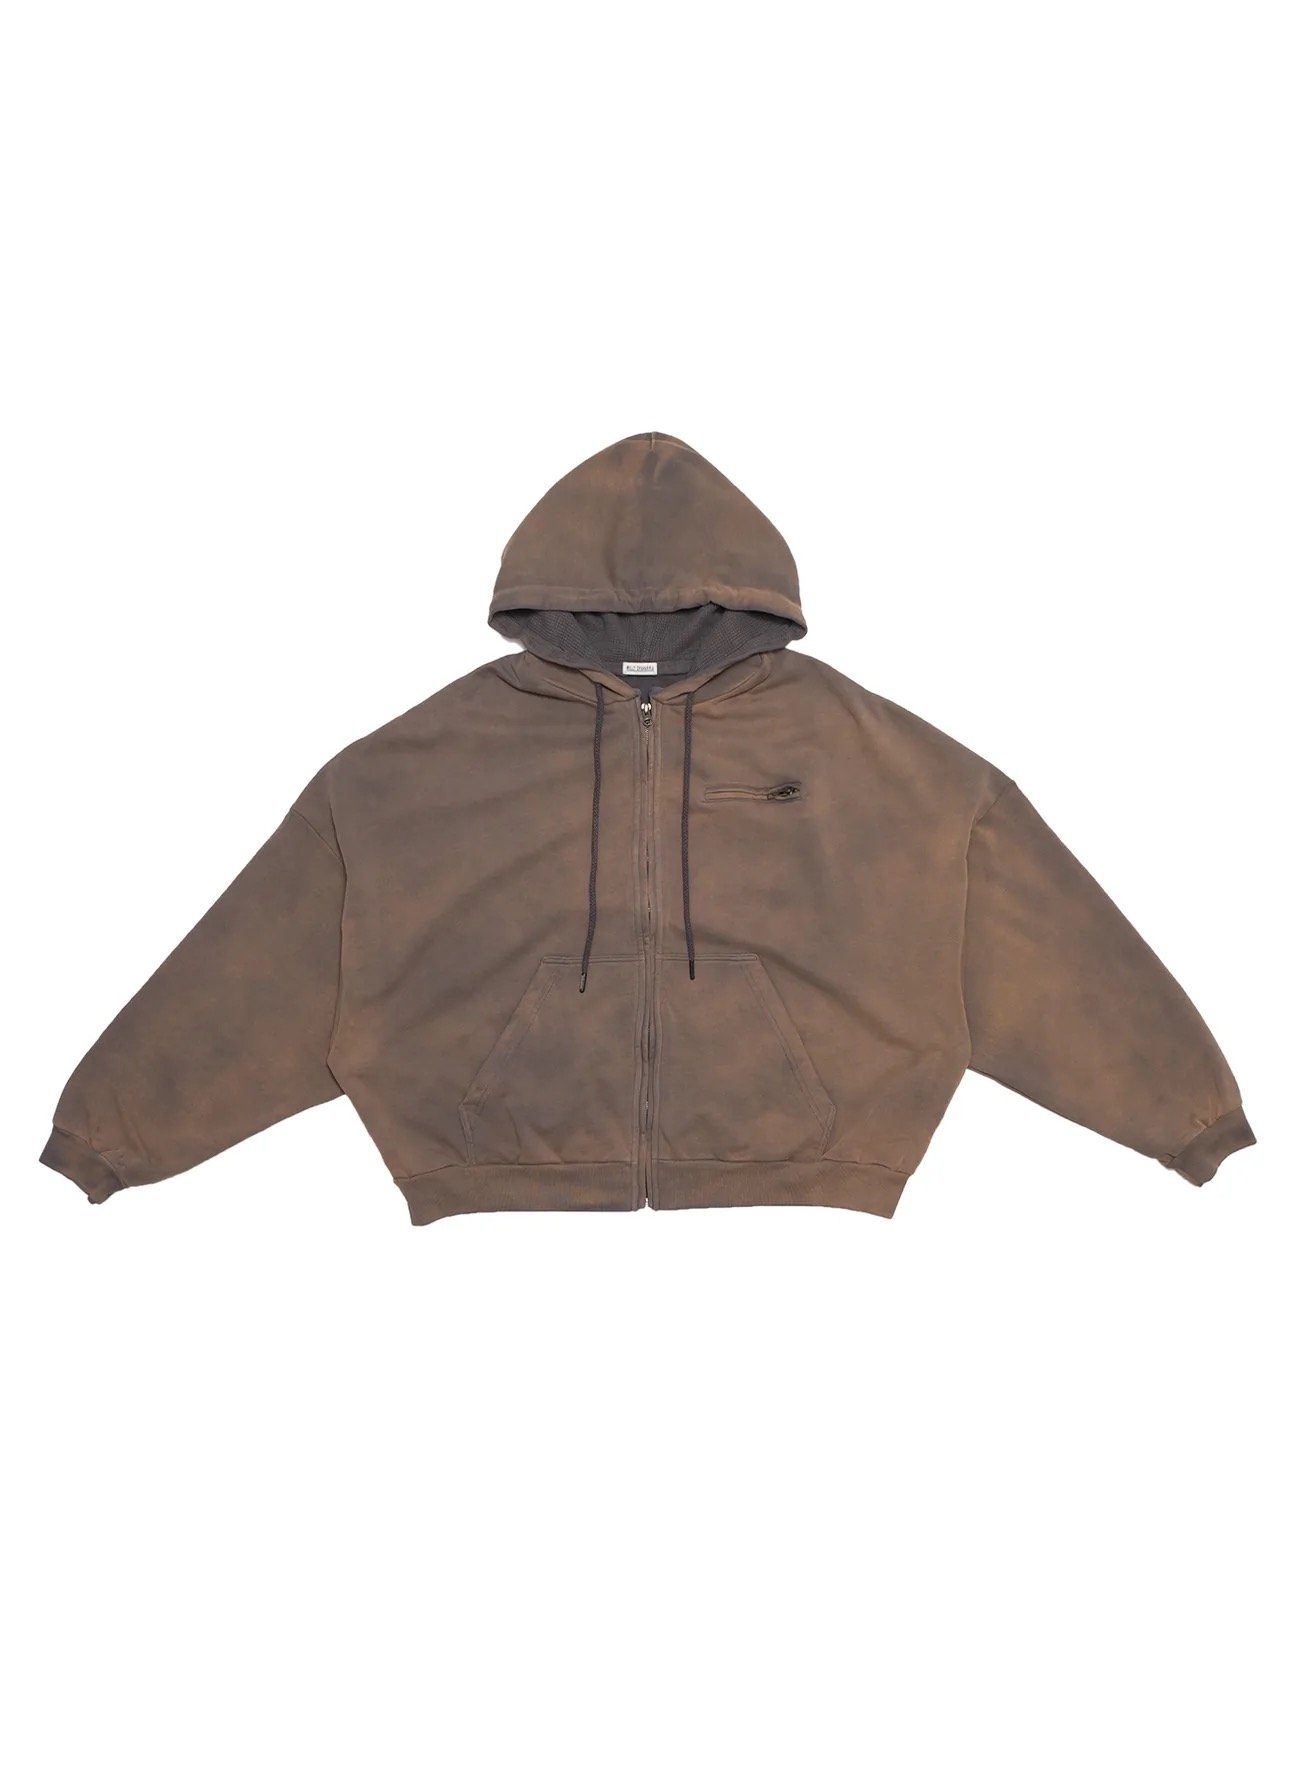 Willy chavarria zip up hoodie - 1